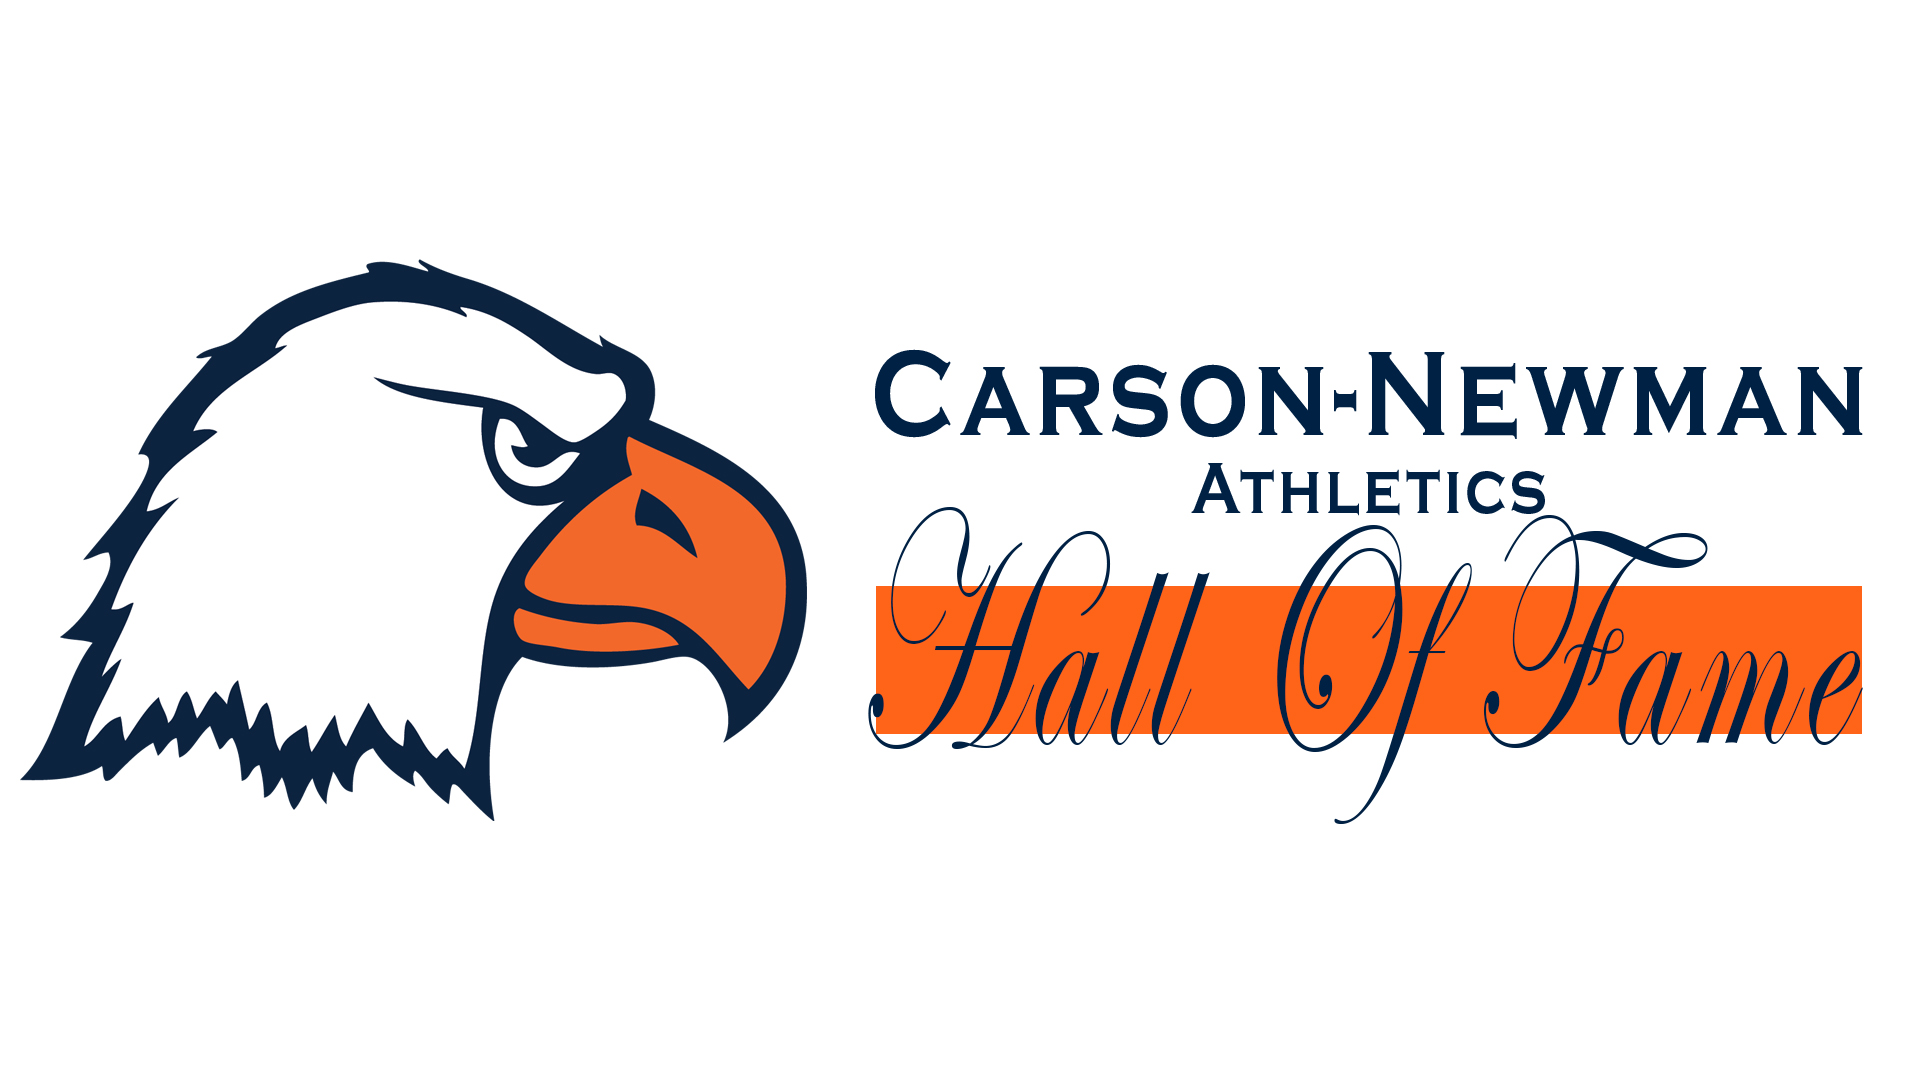 Nominations open for Carson-Newman Athletics Hall of Fame